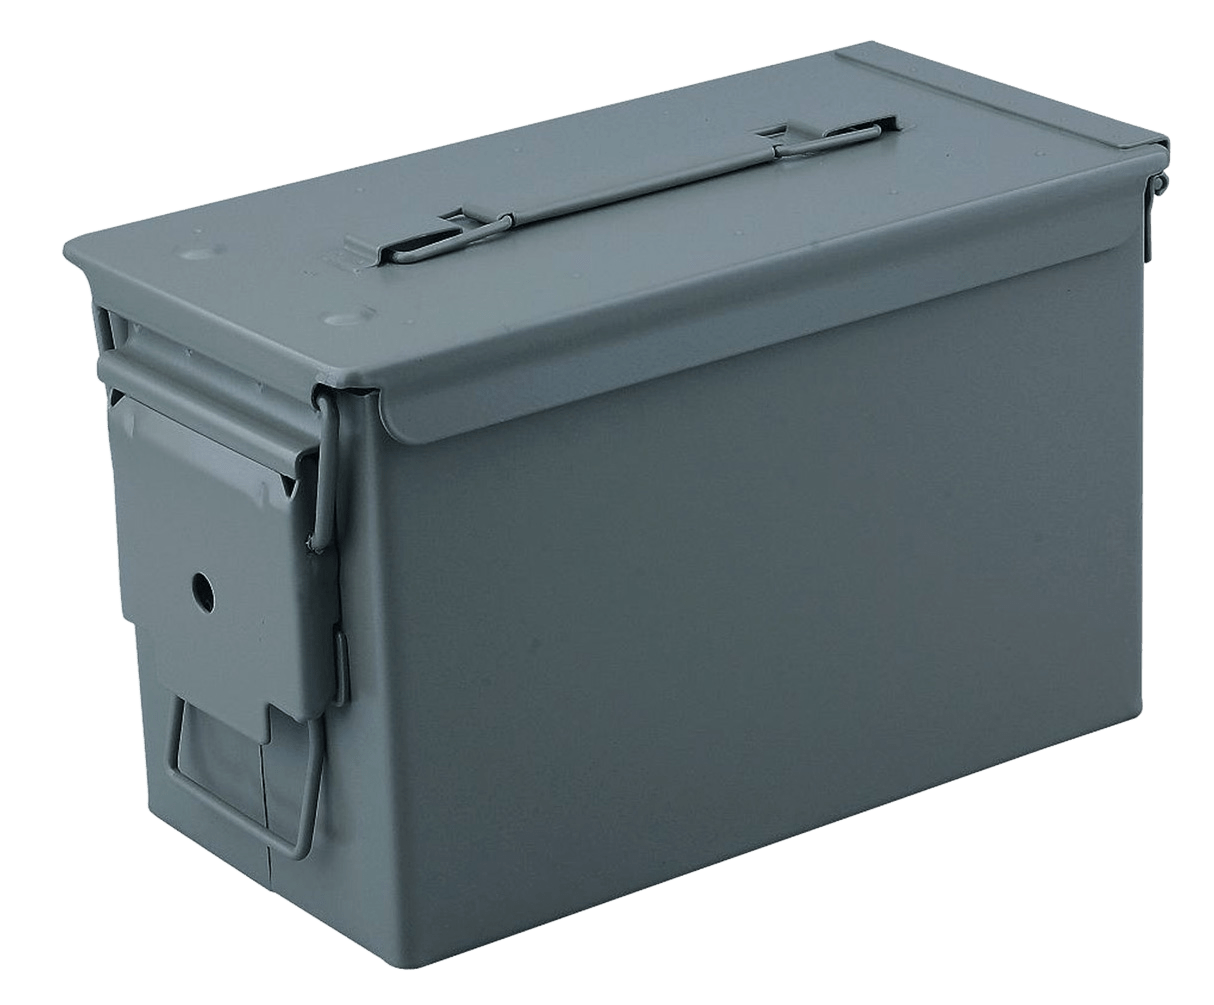 RANGER RUGGED GEAR Ranger Rugged Gear Ammo Can, Reliant Rrg-10105     50 Cal Metal Ammo Can    Grn Shooting